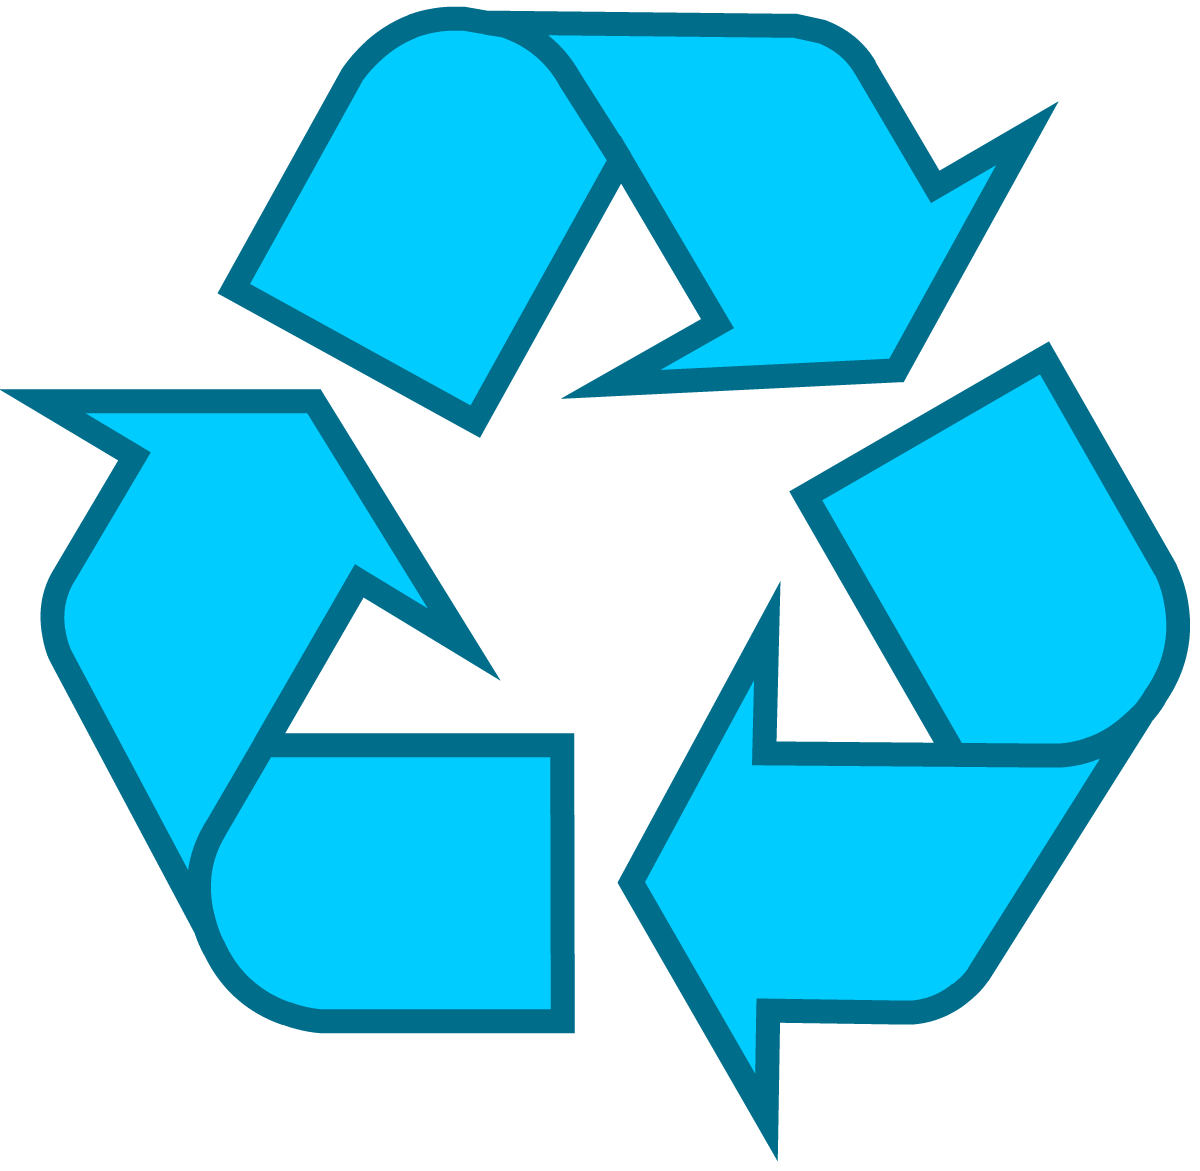 Blue Recycle Logo - Recycling Symbol - Download the Original Recycle Logo